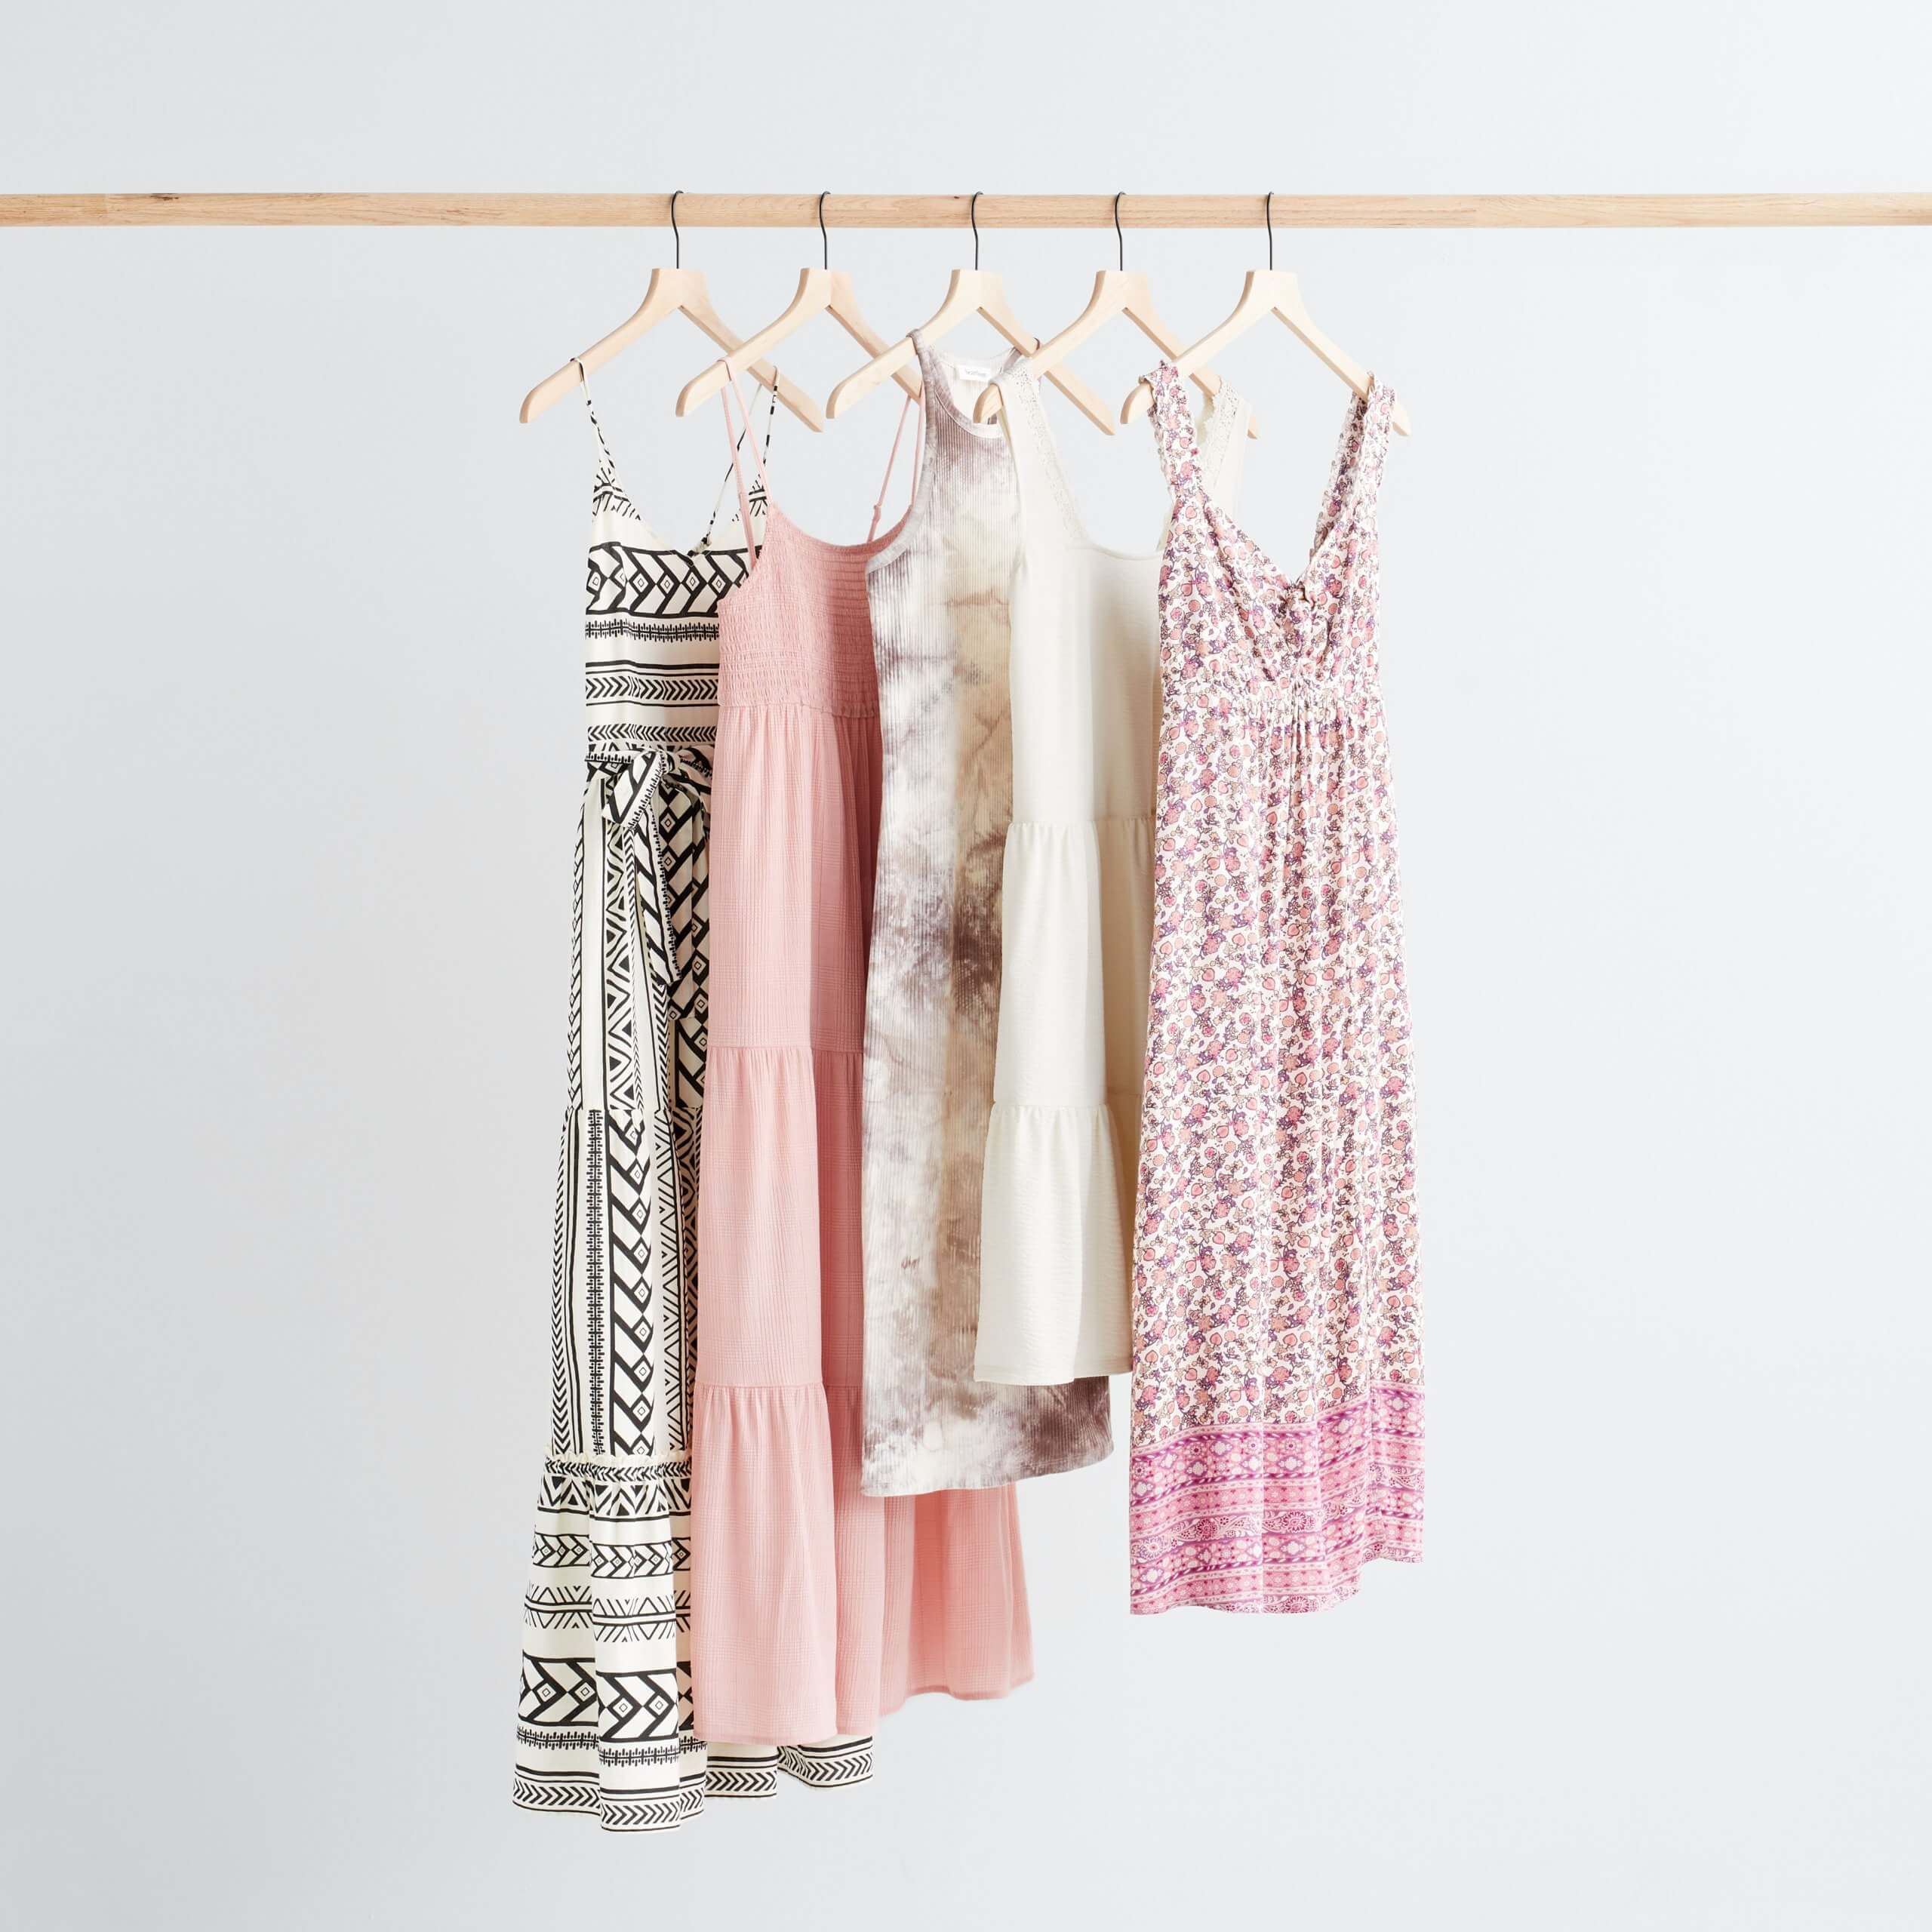 Stitch Fix Women’s boho style dresses hanging in a variety of colors, prints and lengths.